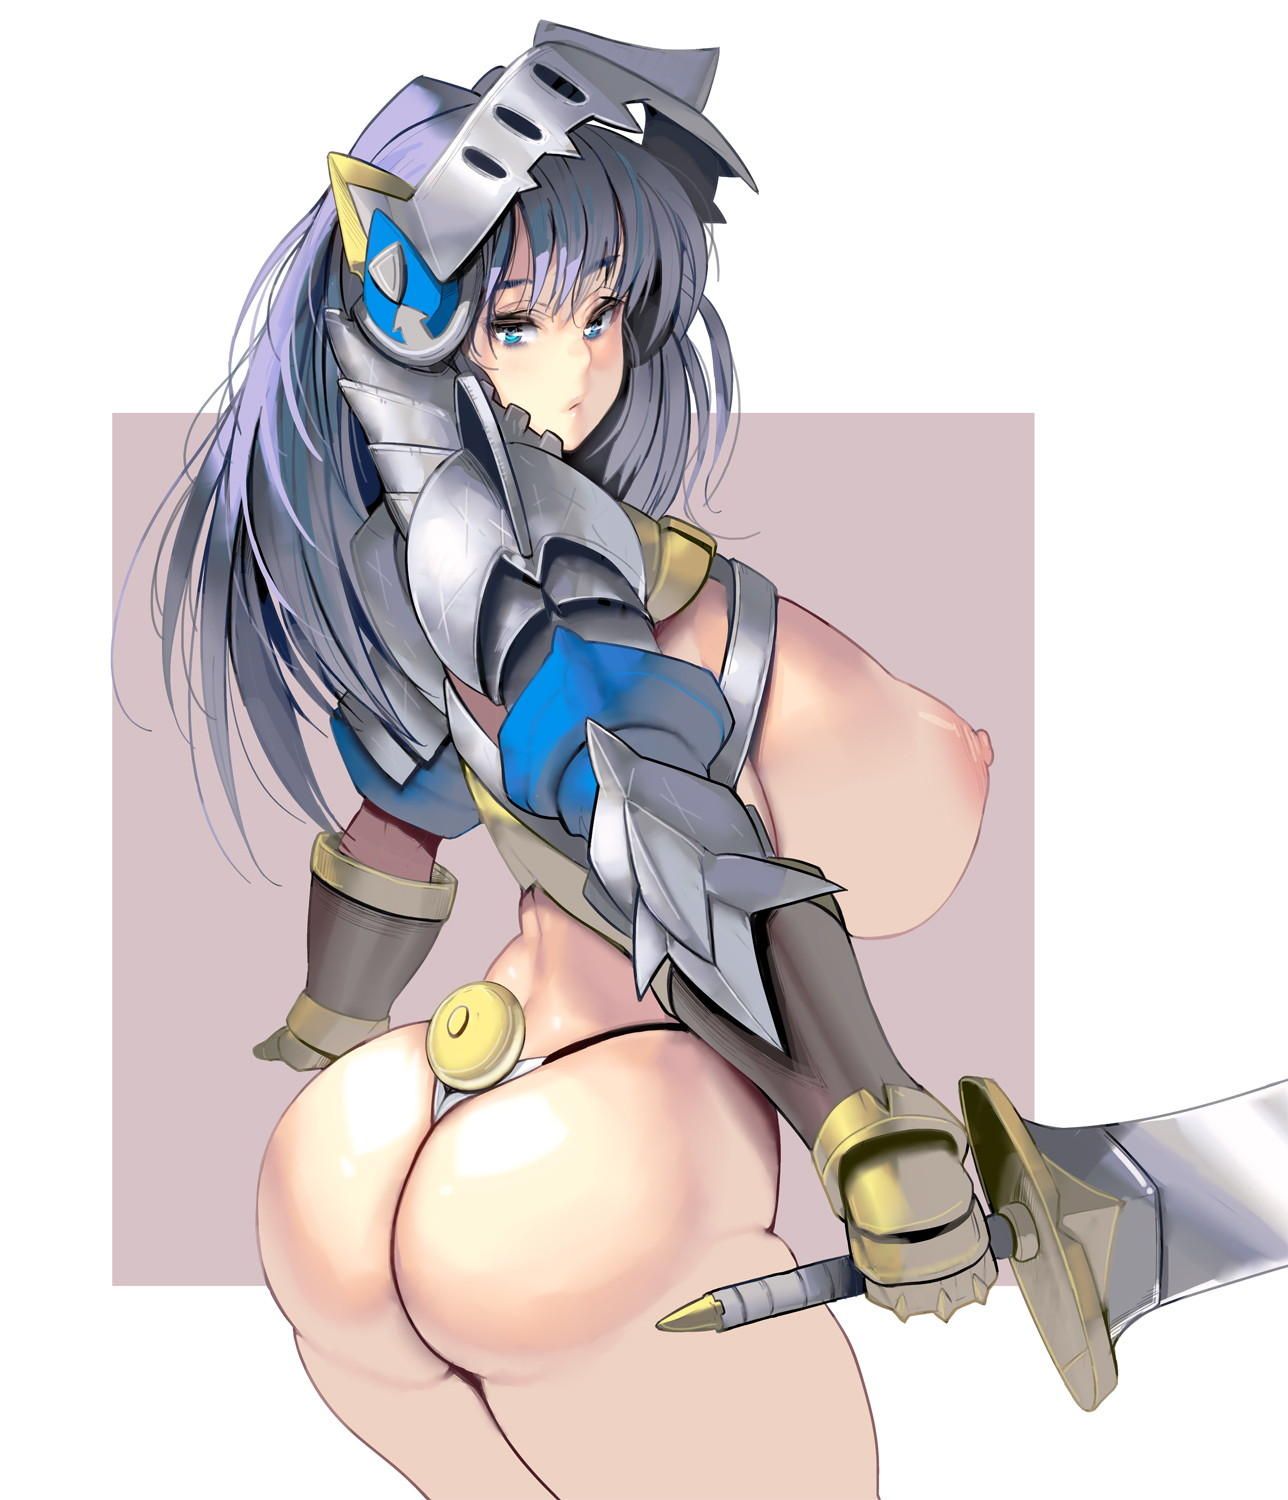 I'm getting a nasty and obscene image of a female warrior! 5